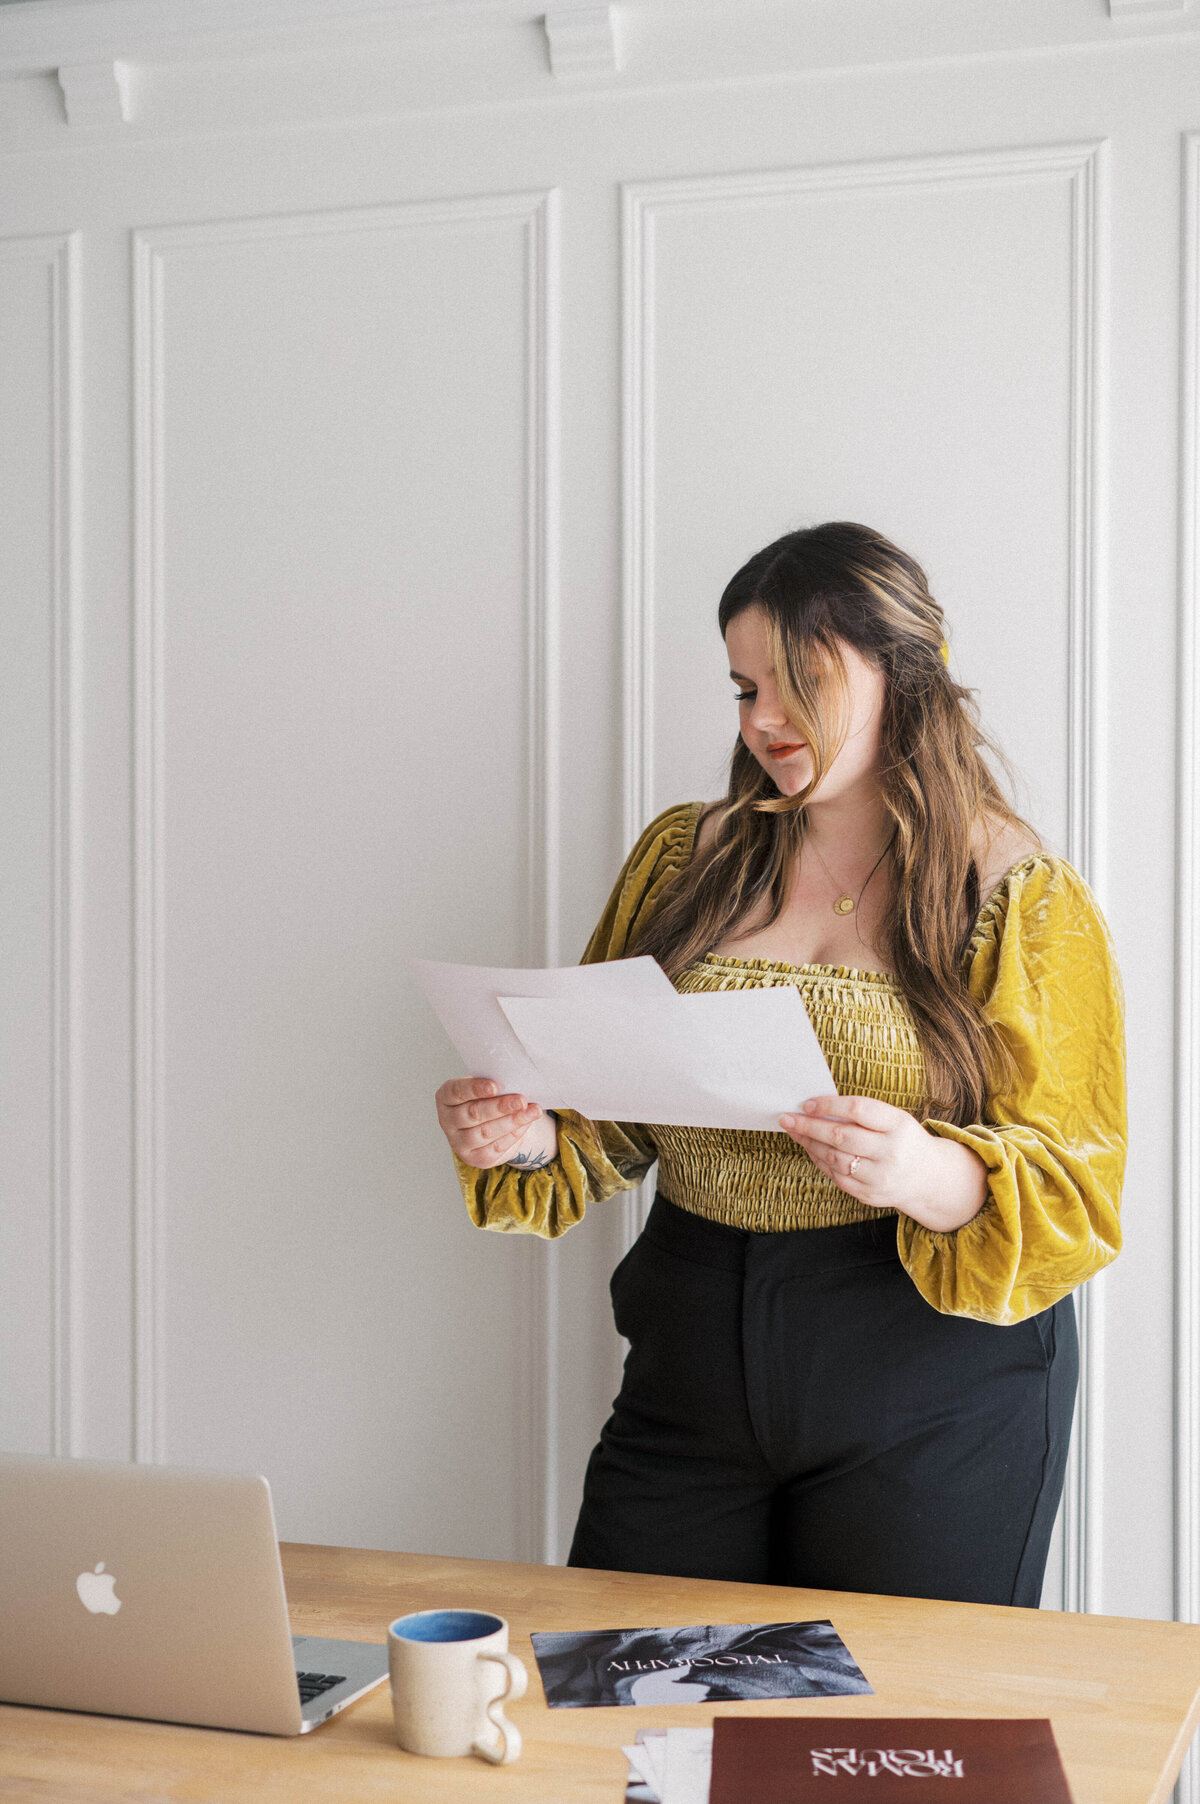 Brand photography of a woman wearing velvet yellow shirt looking through brand design document